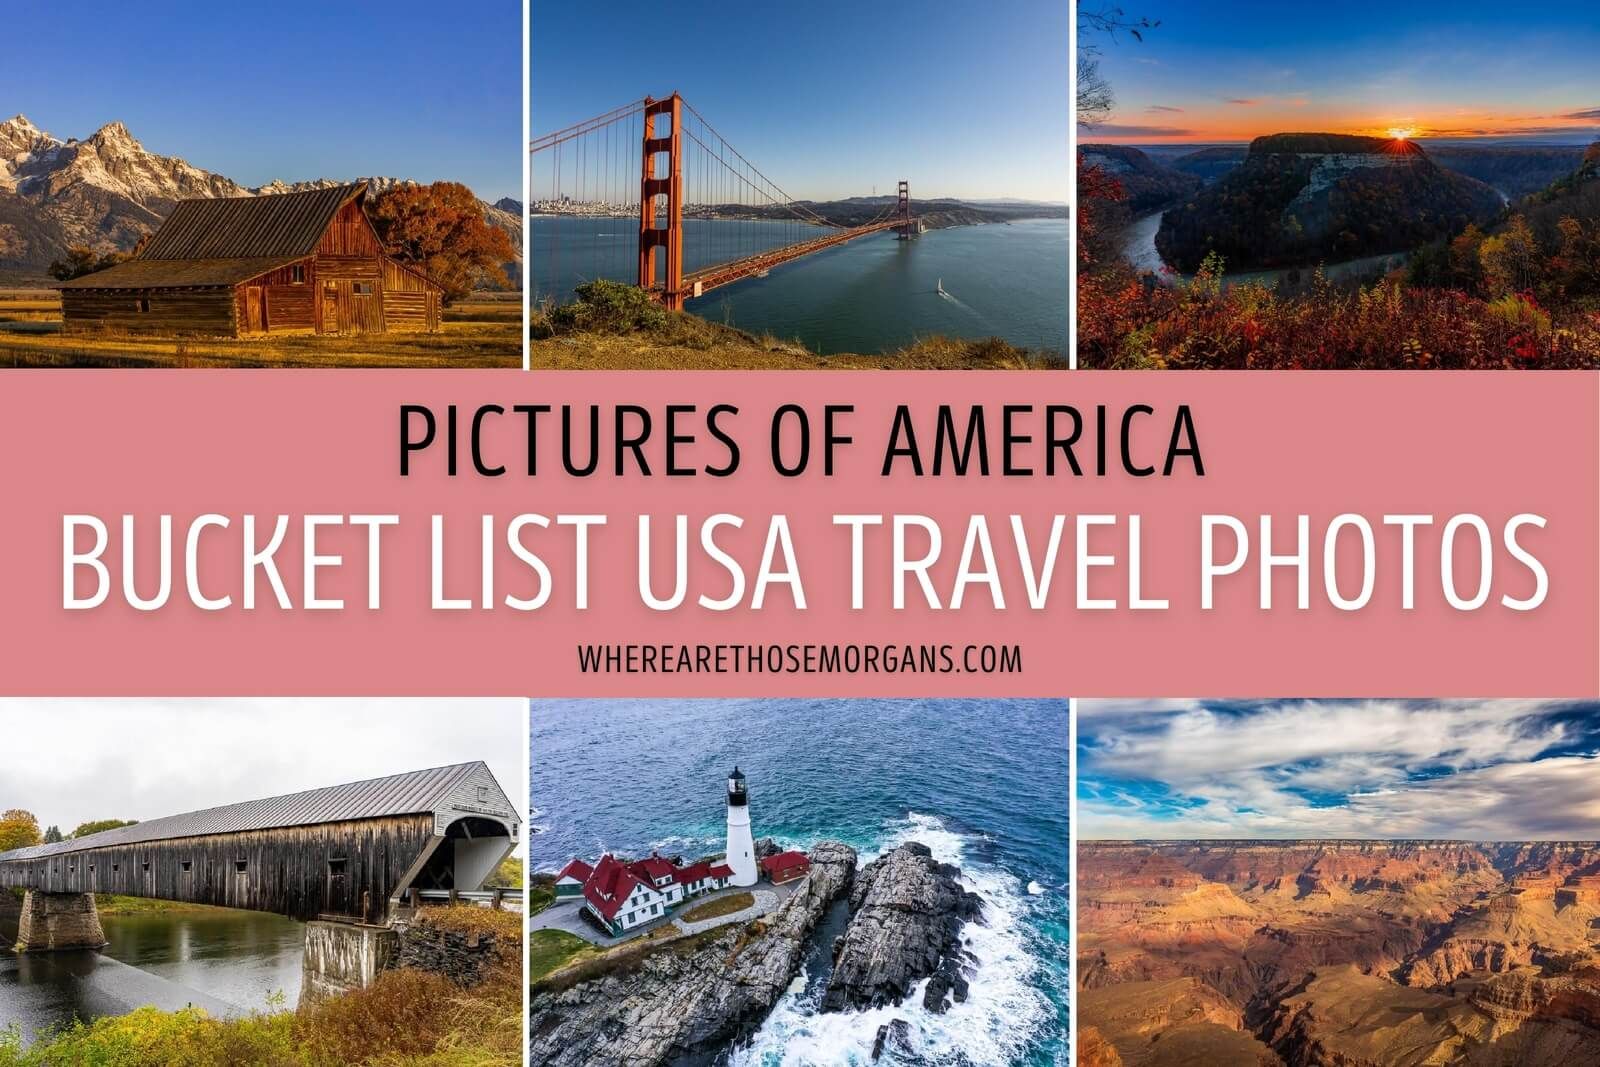 Pictures of America: 100+ Bucket List USA Travel Photos To Inspire You